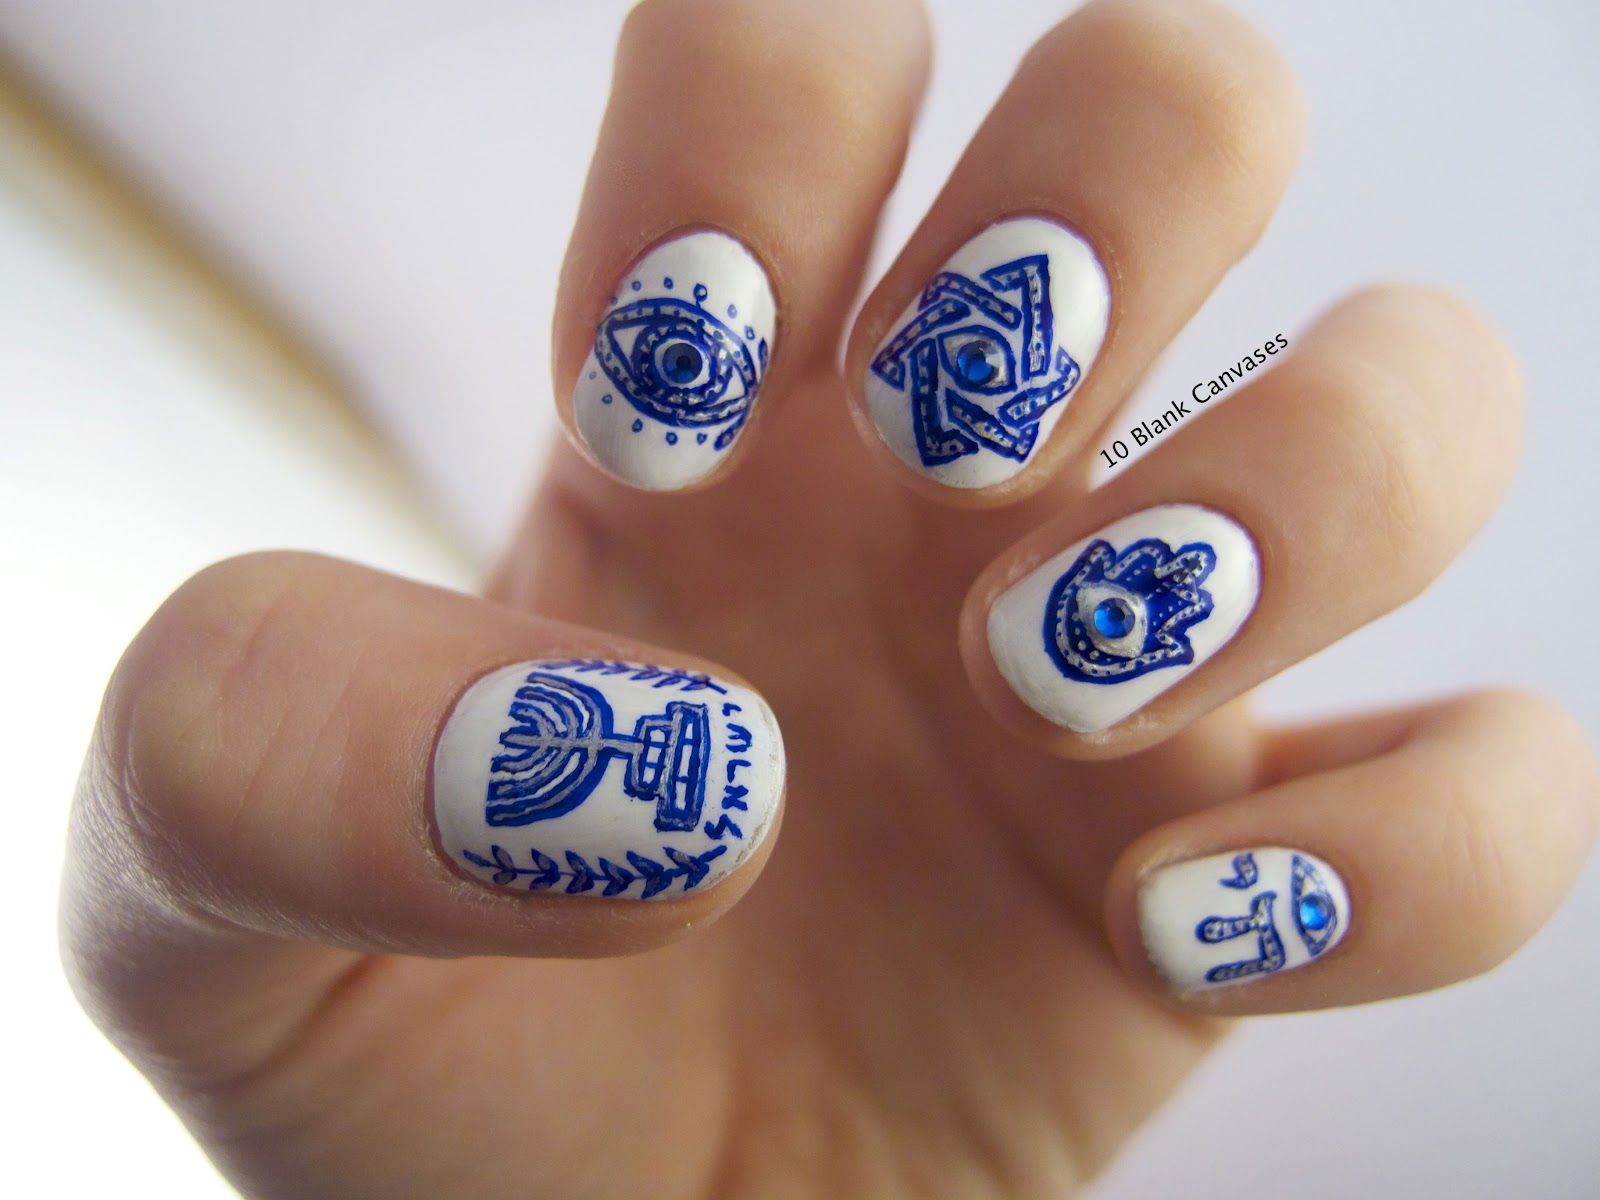 2. "10 Stunning Evil Eye Nail Designs to Try Now" - wide 6